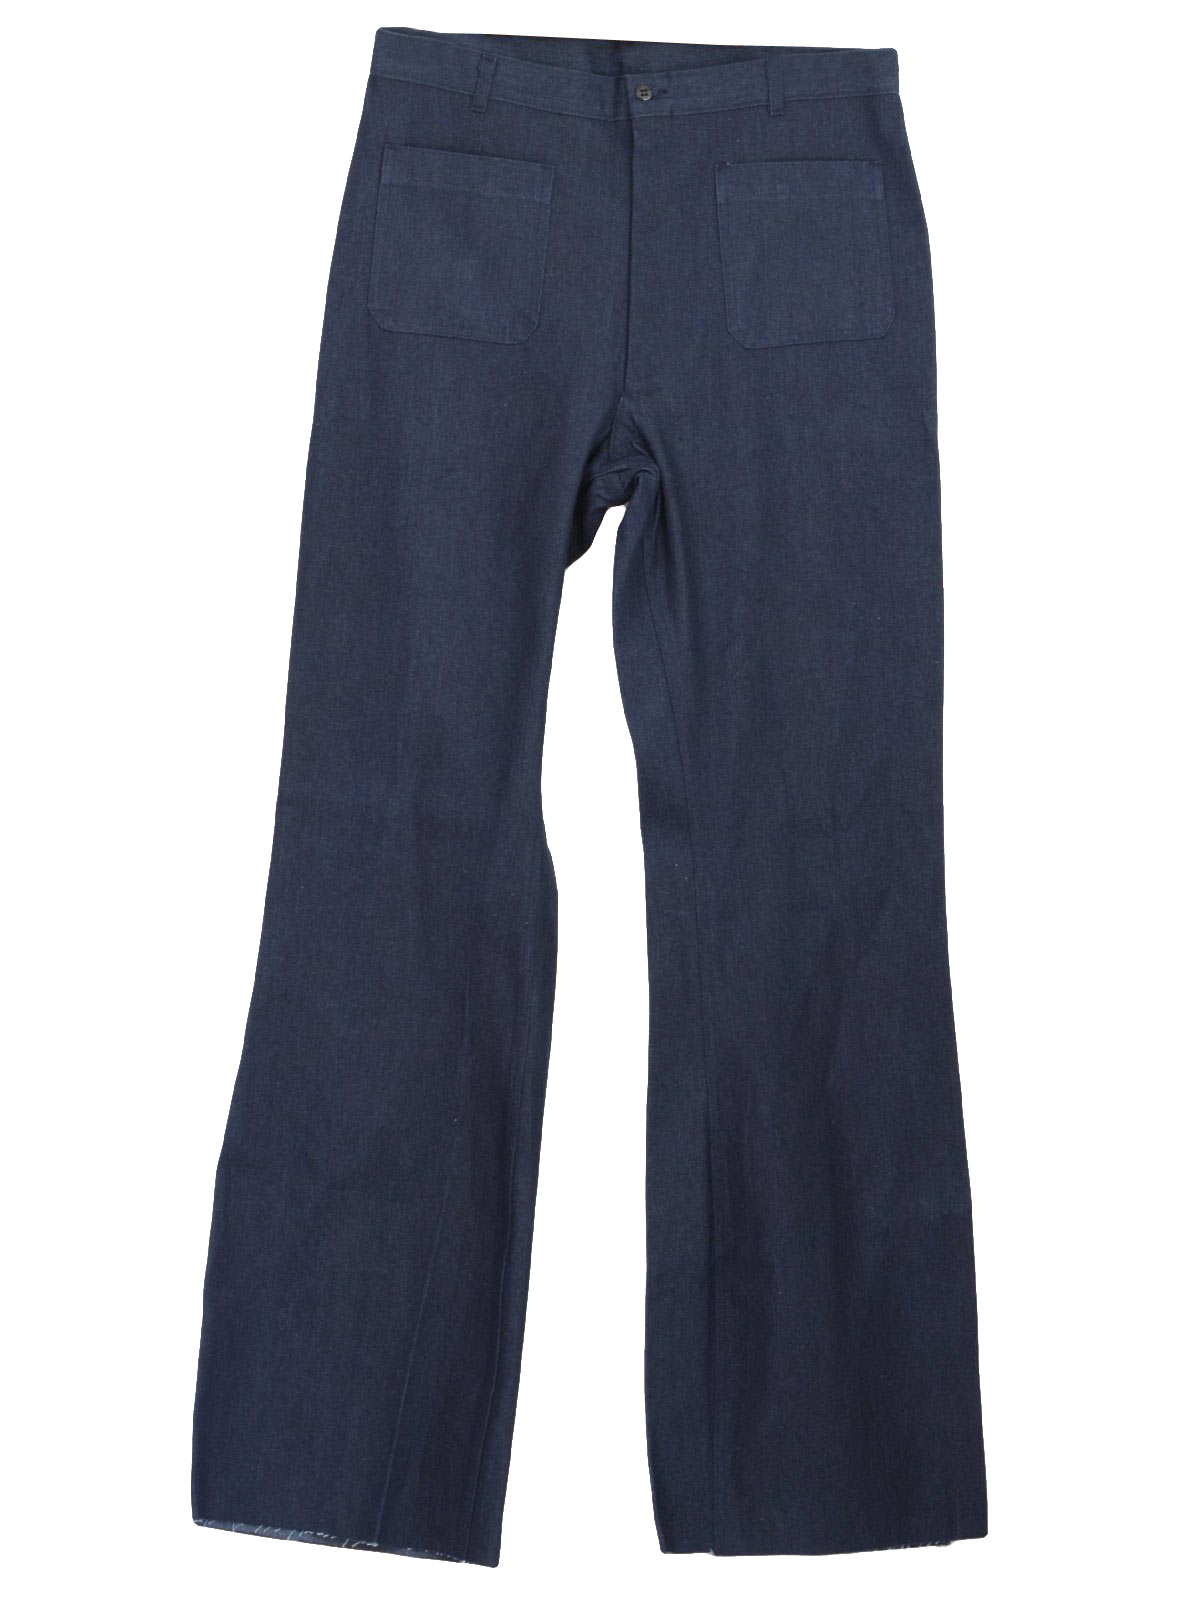 1960's Bellbottom Pants (Utility Trousers): 60s -Utility Trousers- Mens ...